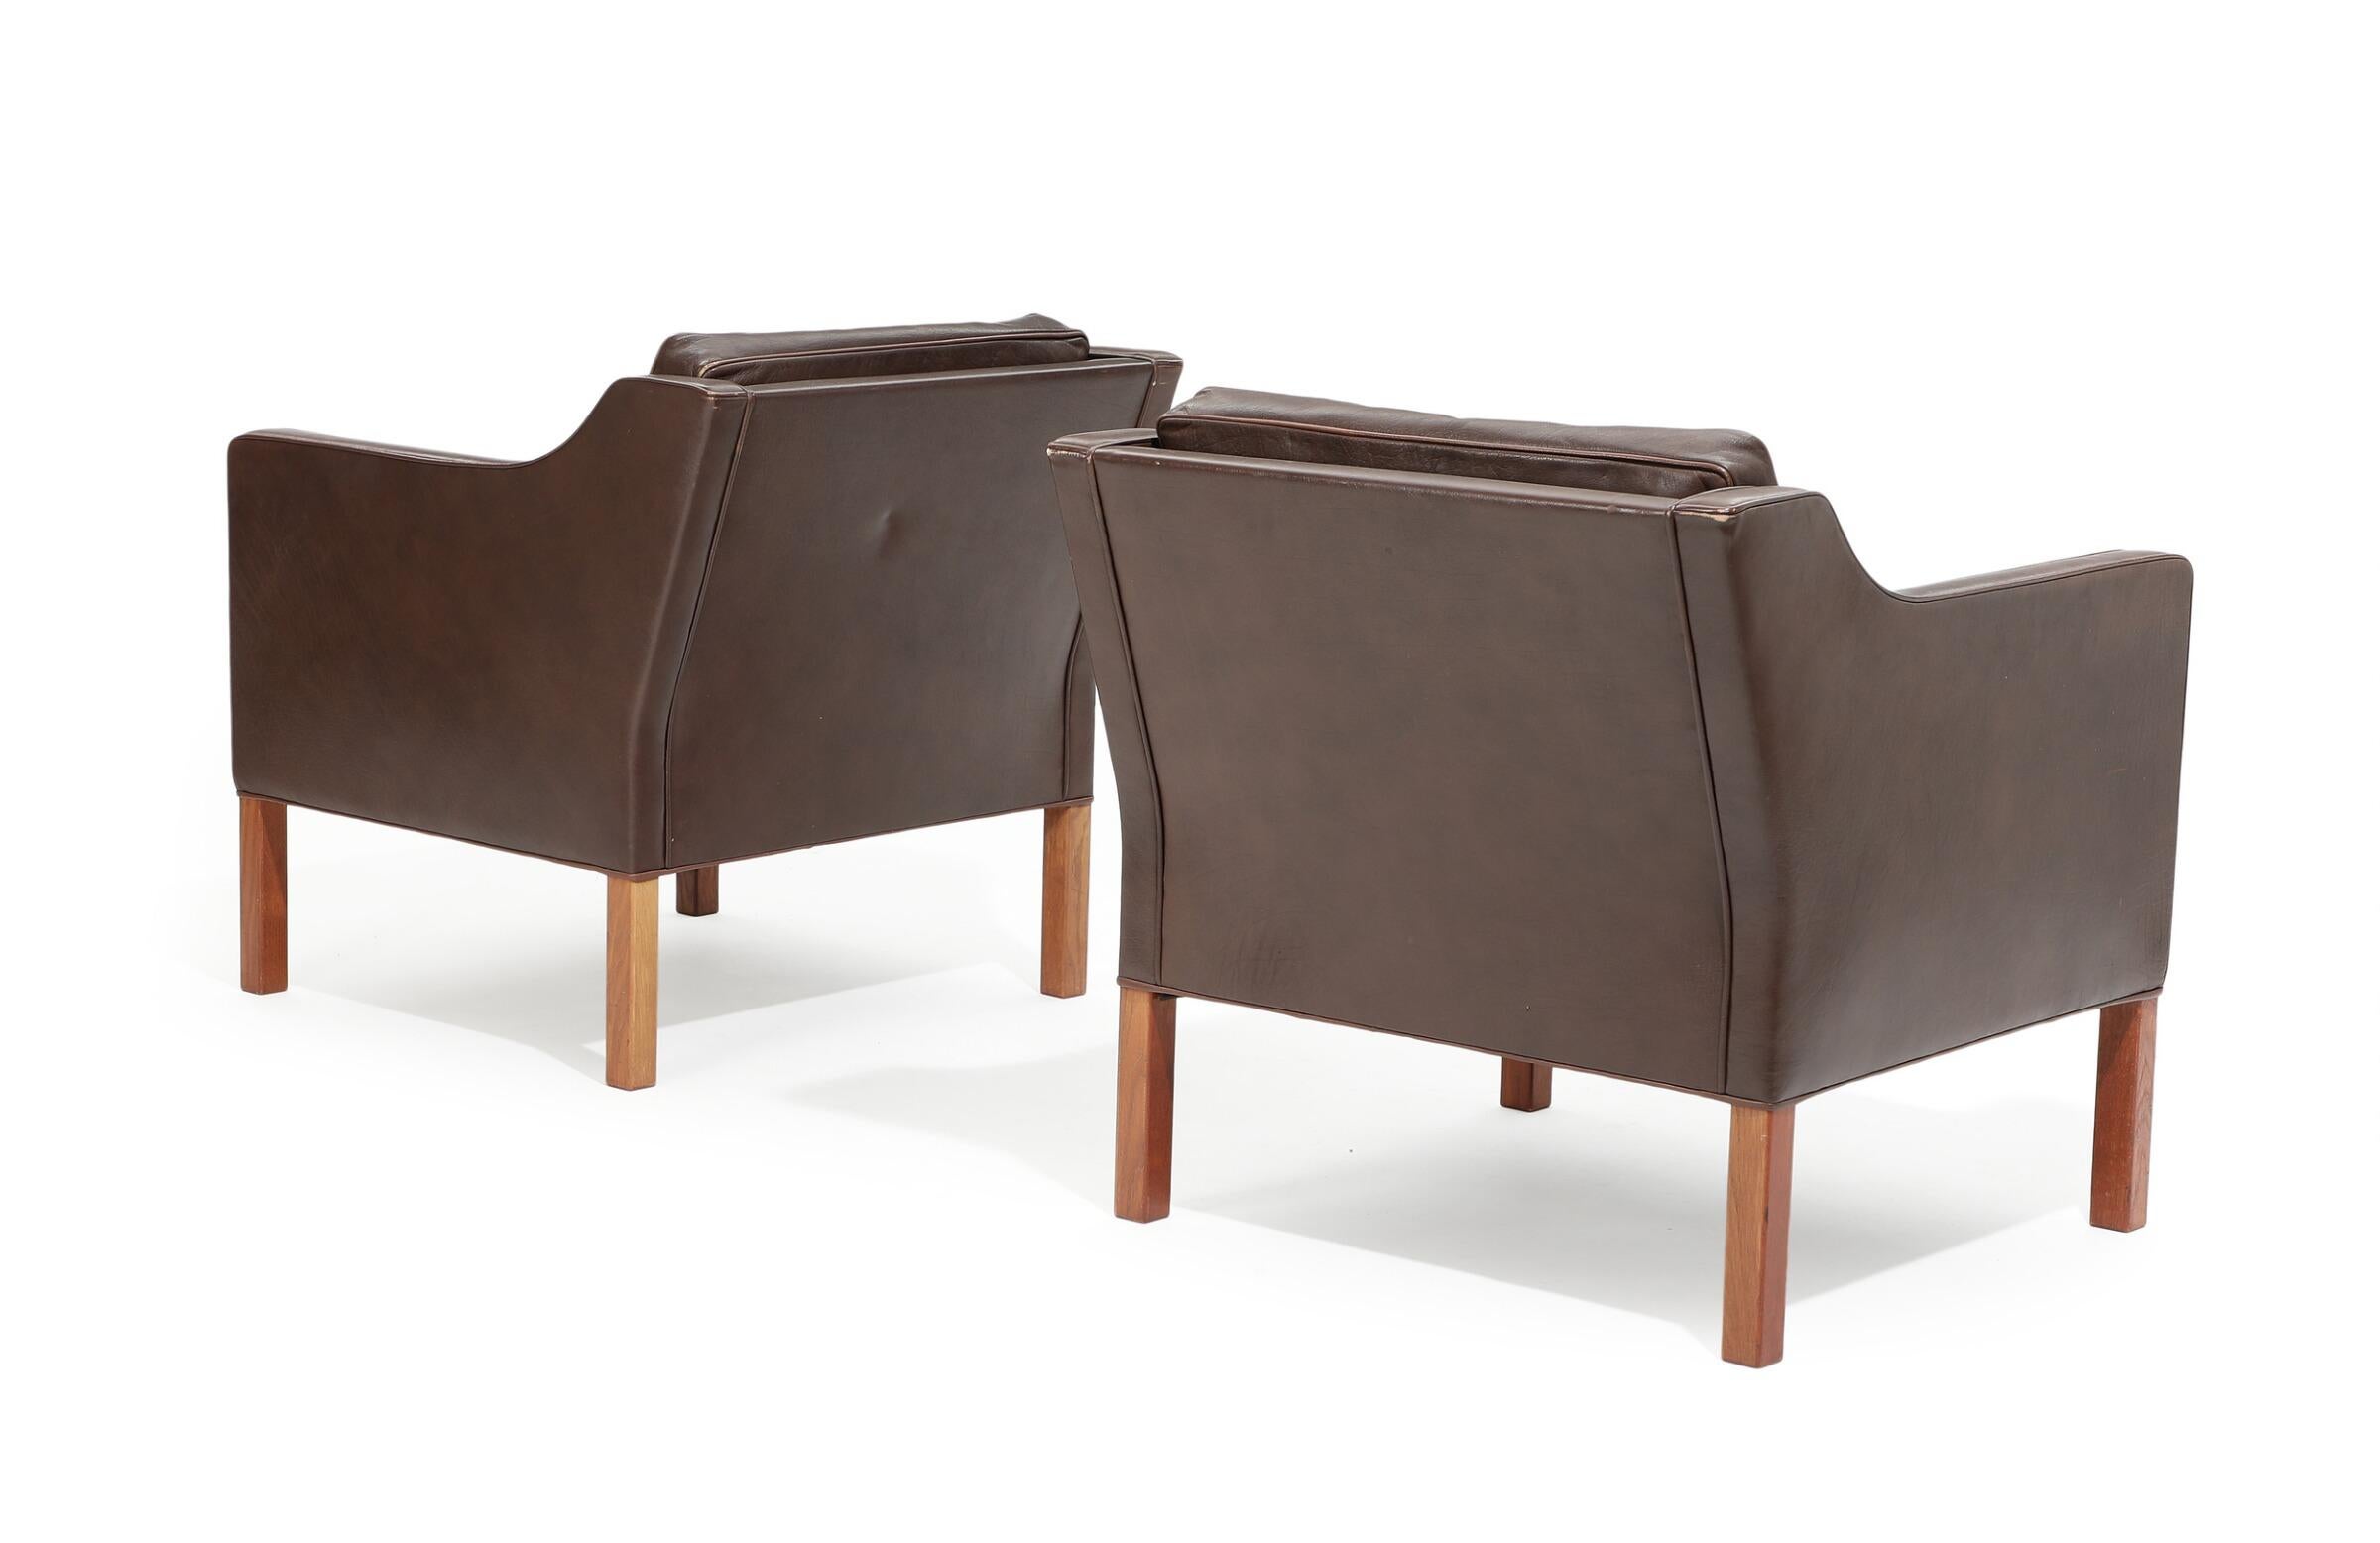 A pair of leather armchairs by Danish designer Børge Mogensen, with mahogany legs. A timeless and elegant design. Sides, back and cushions upholstered with brown colored leather. Model 2421. Manufactured and marked by Fredericia Stolefabrik.